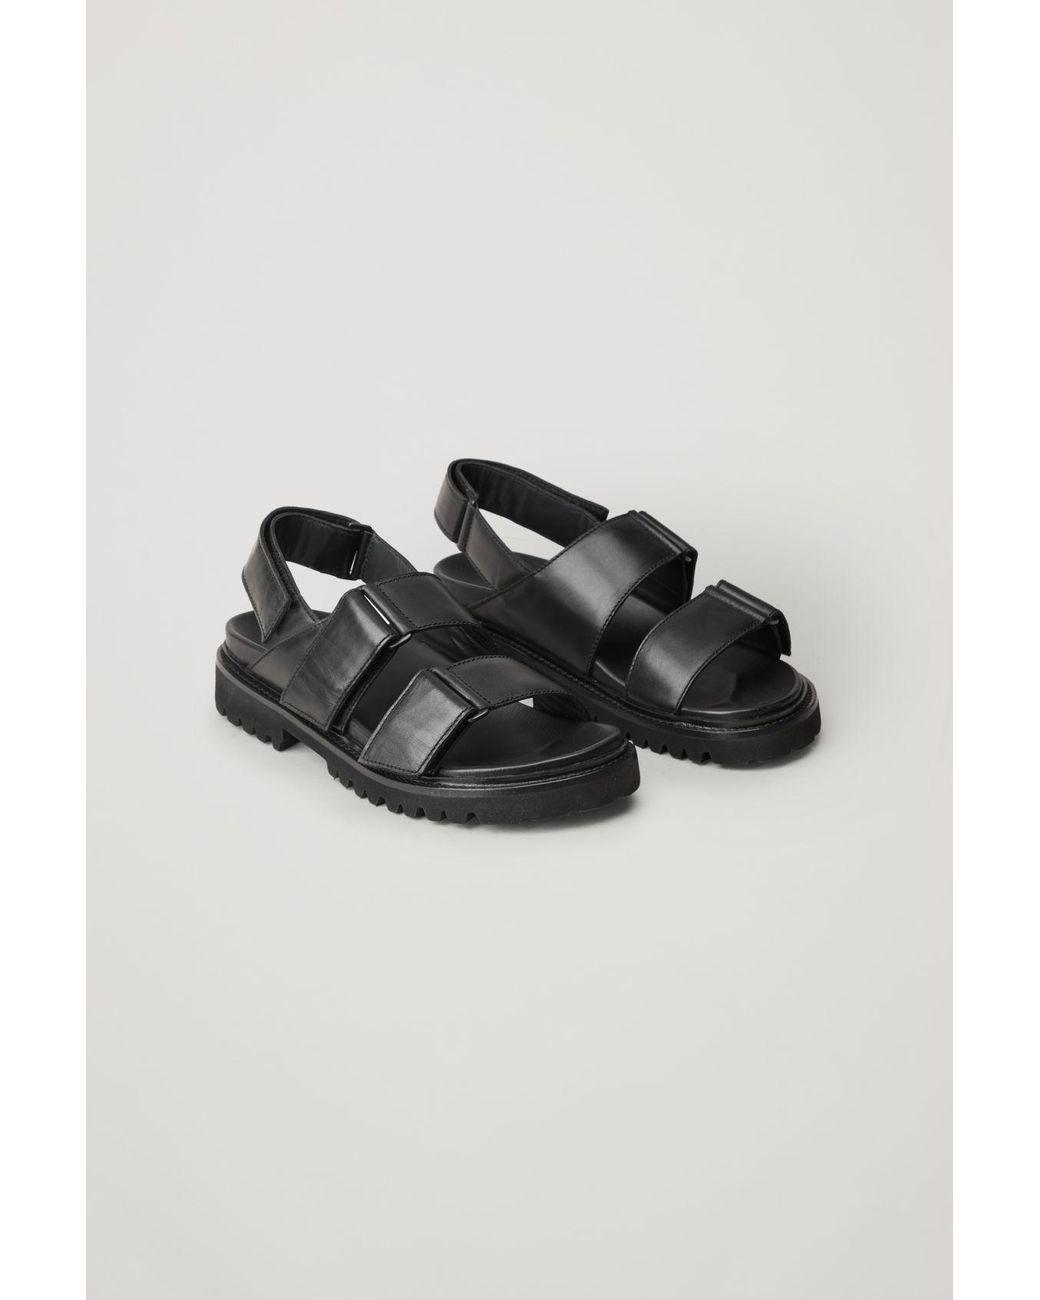 COS Women's Black Chunky Leather Sandals